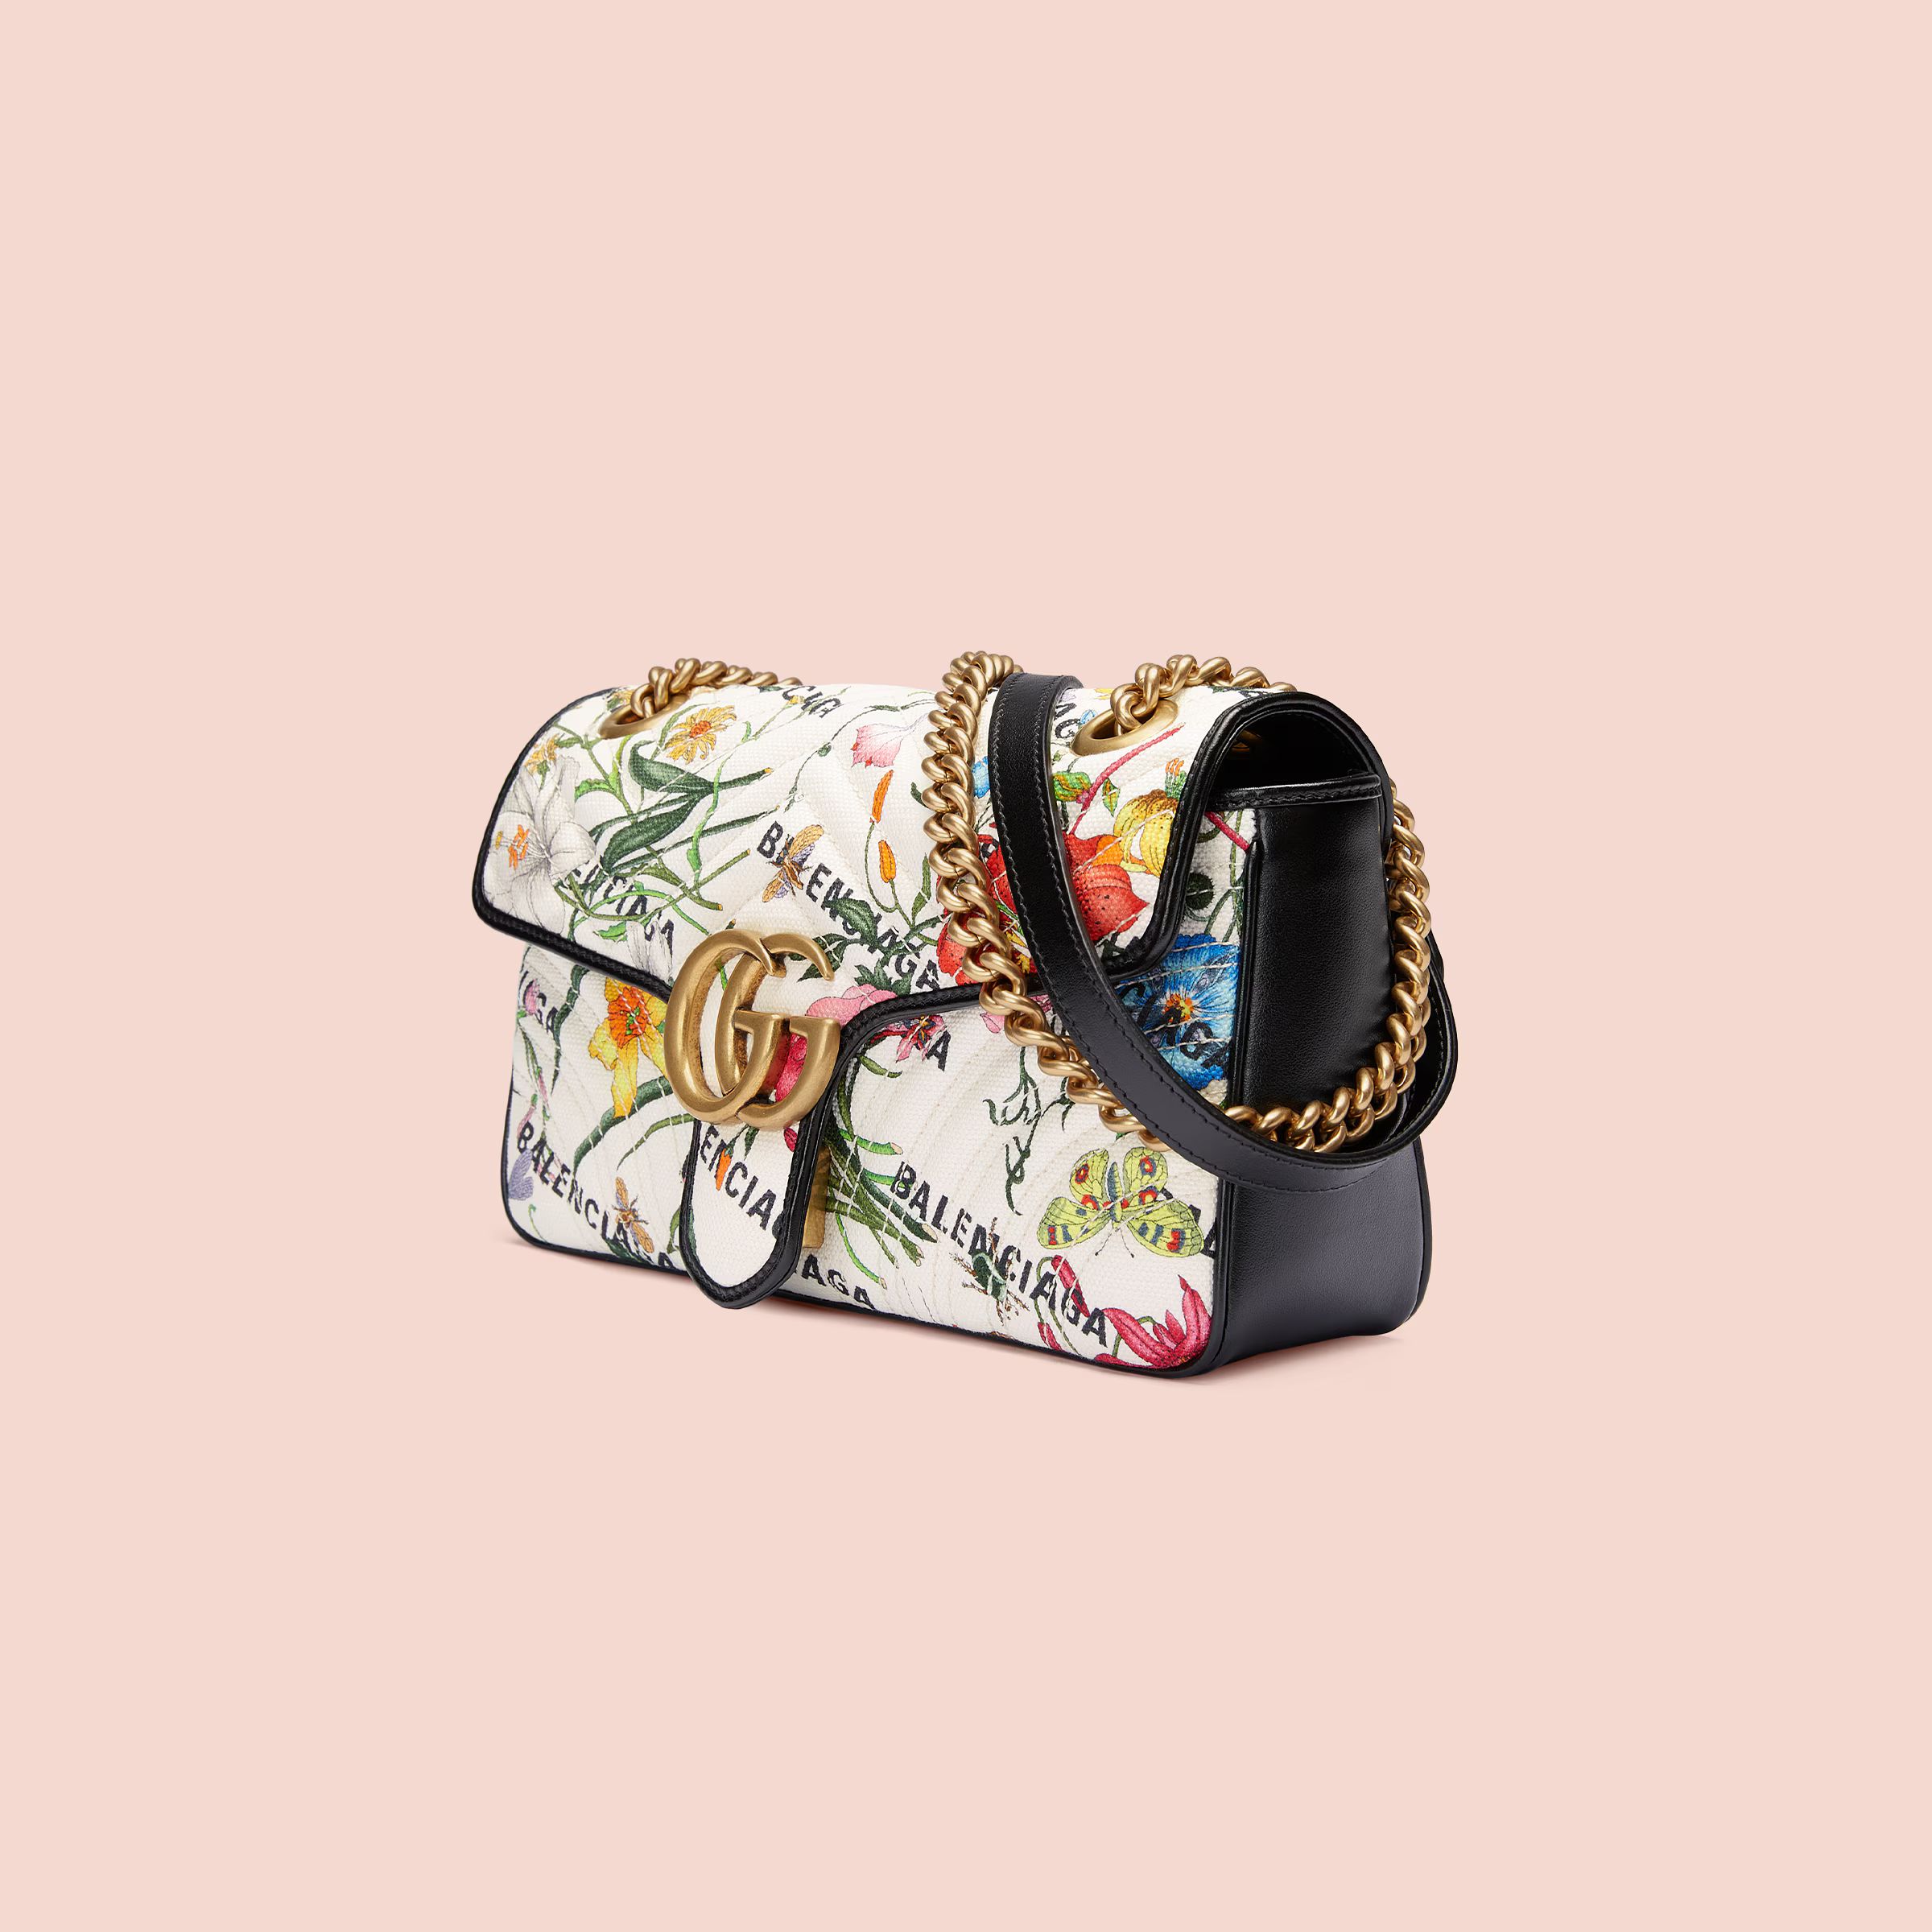 Gucci Online Exclusive The Hacker Project small GG Marmont bag | Gucci (US)